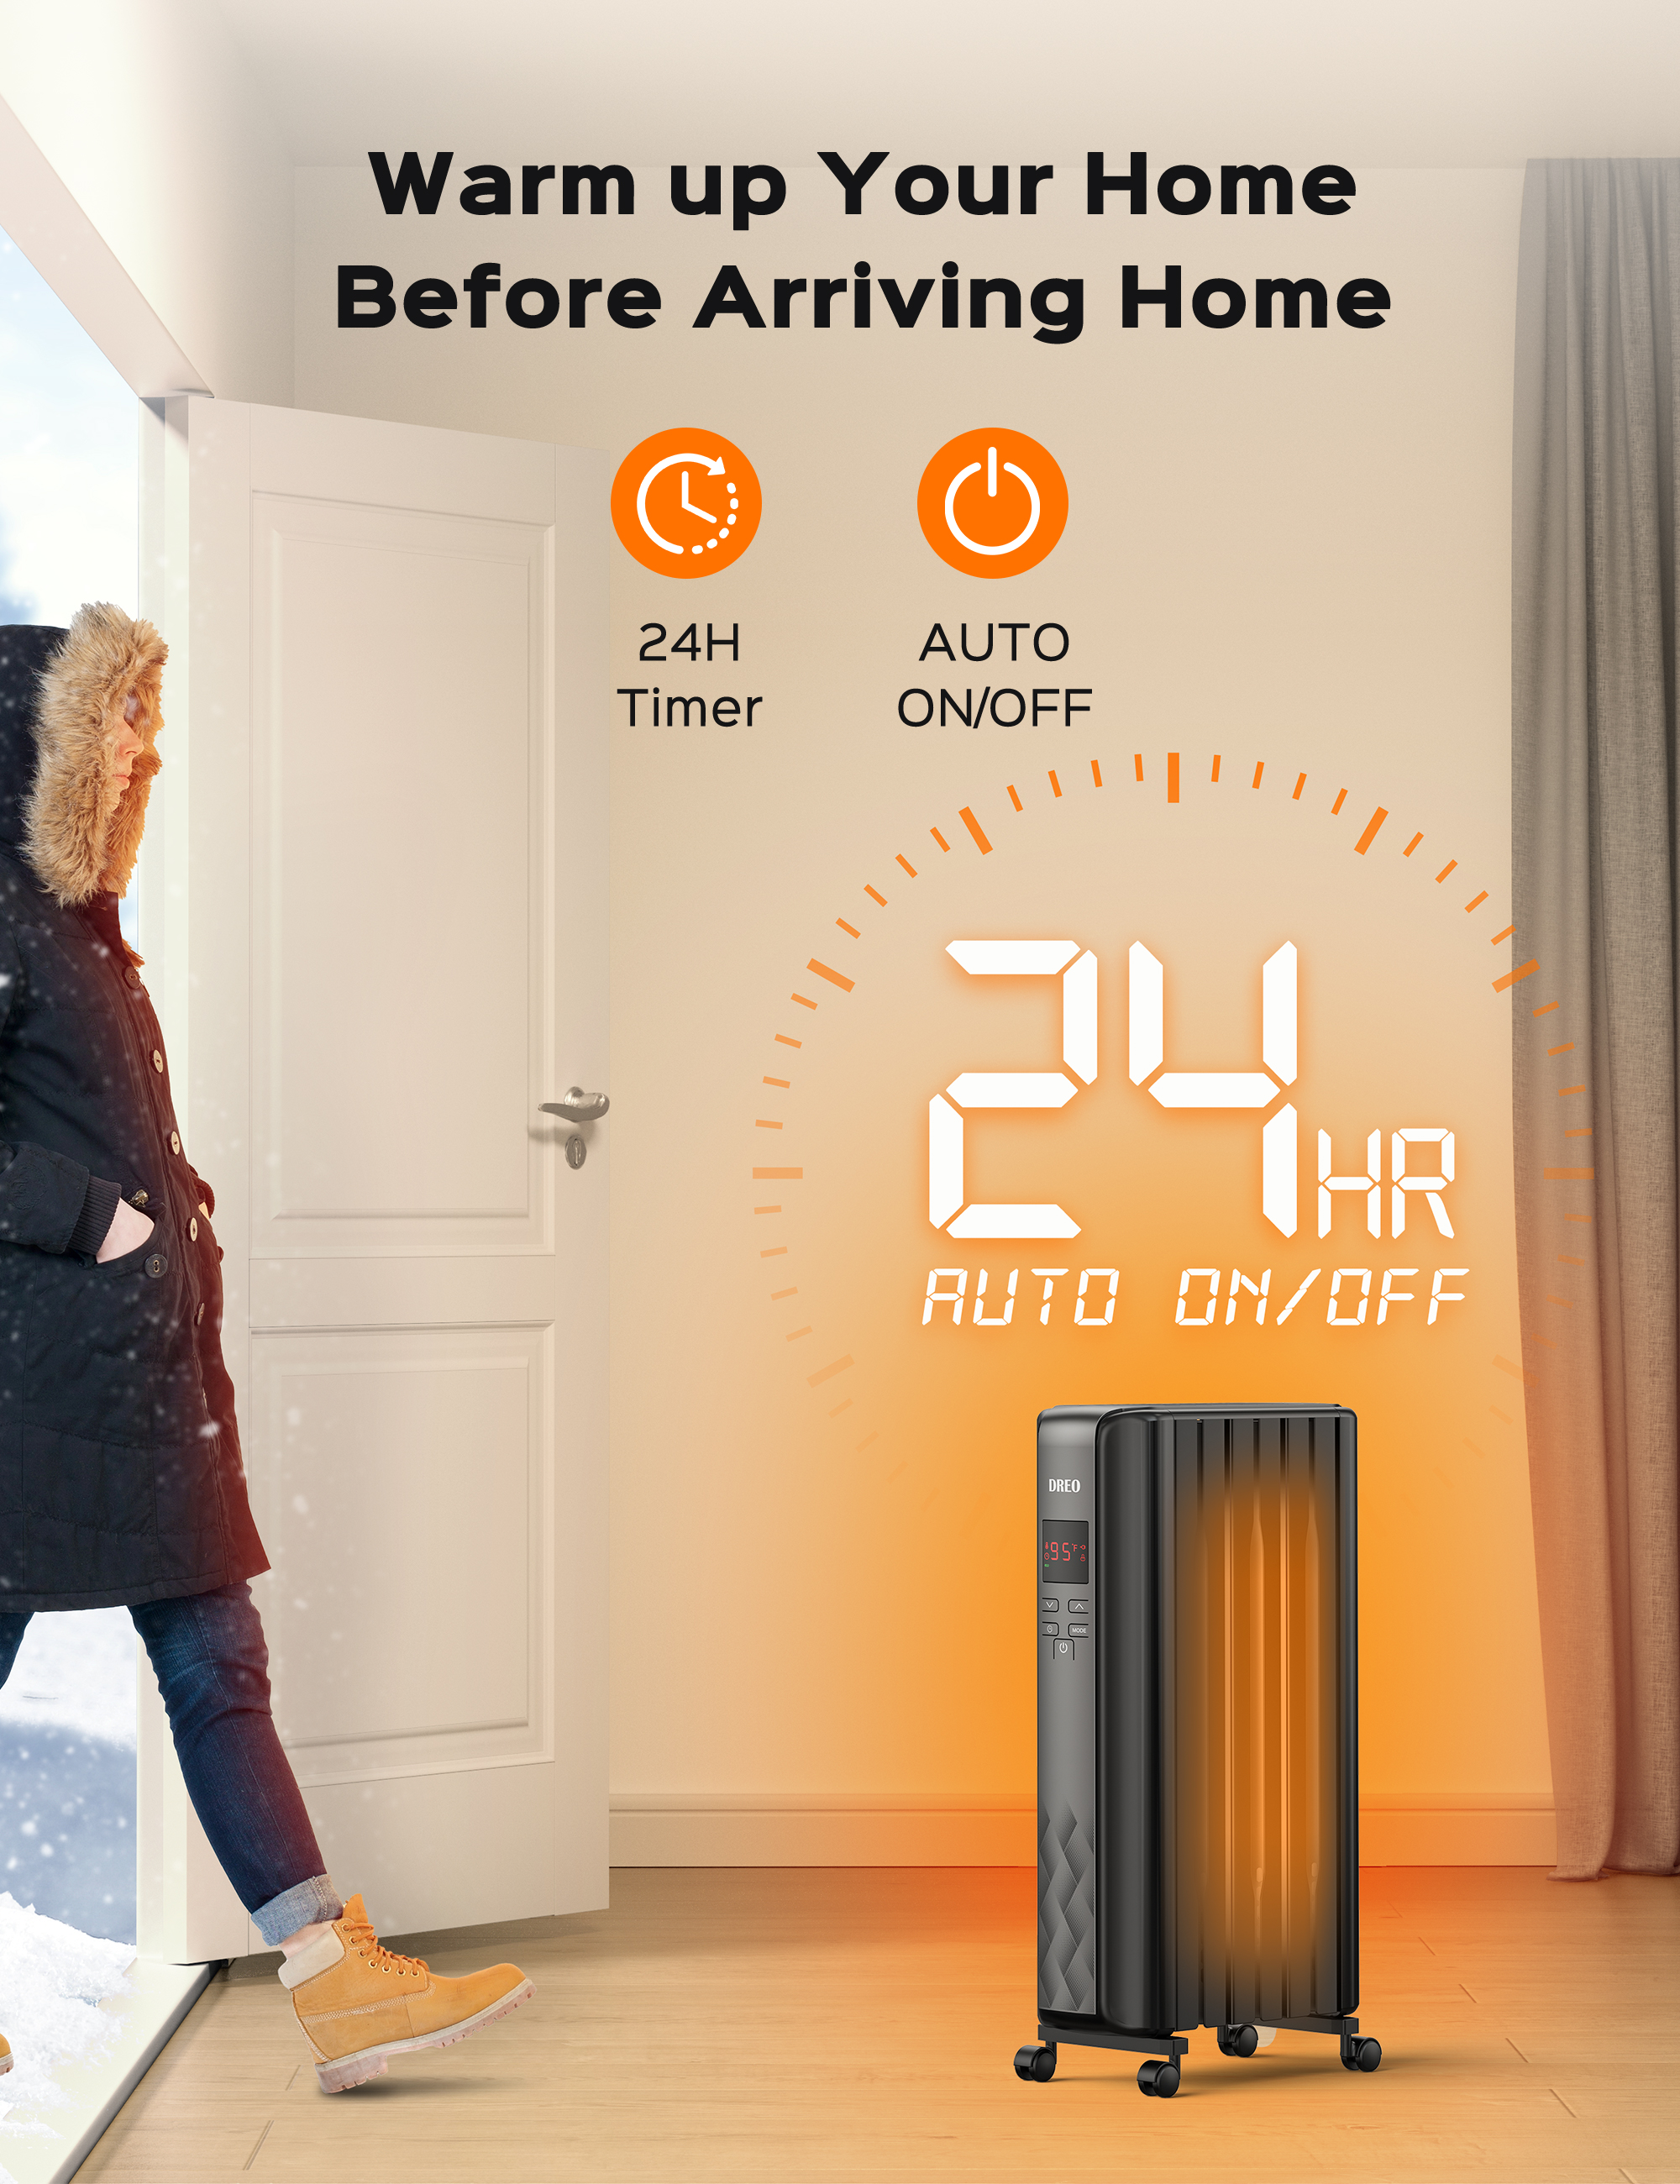 Dreo Radiator Heater, Upgrade 1500W Electric Portable Space Oil Filled Heater with Remote Control, 4 Modes, Overheat & Tip-Over Protection, 24h Timer, Digital Thermostat, Quiet, Indoor - image 3 of 7